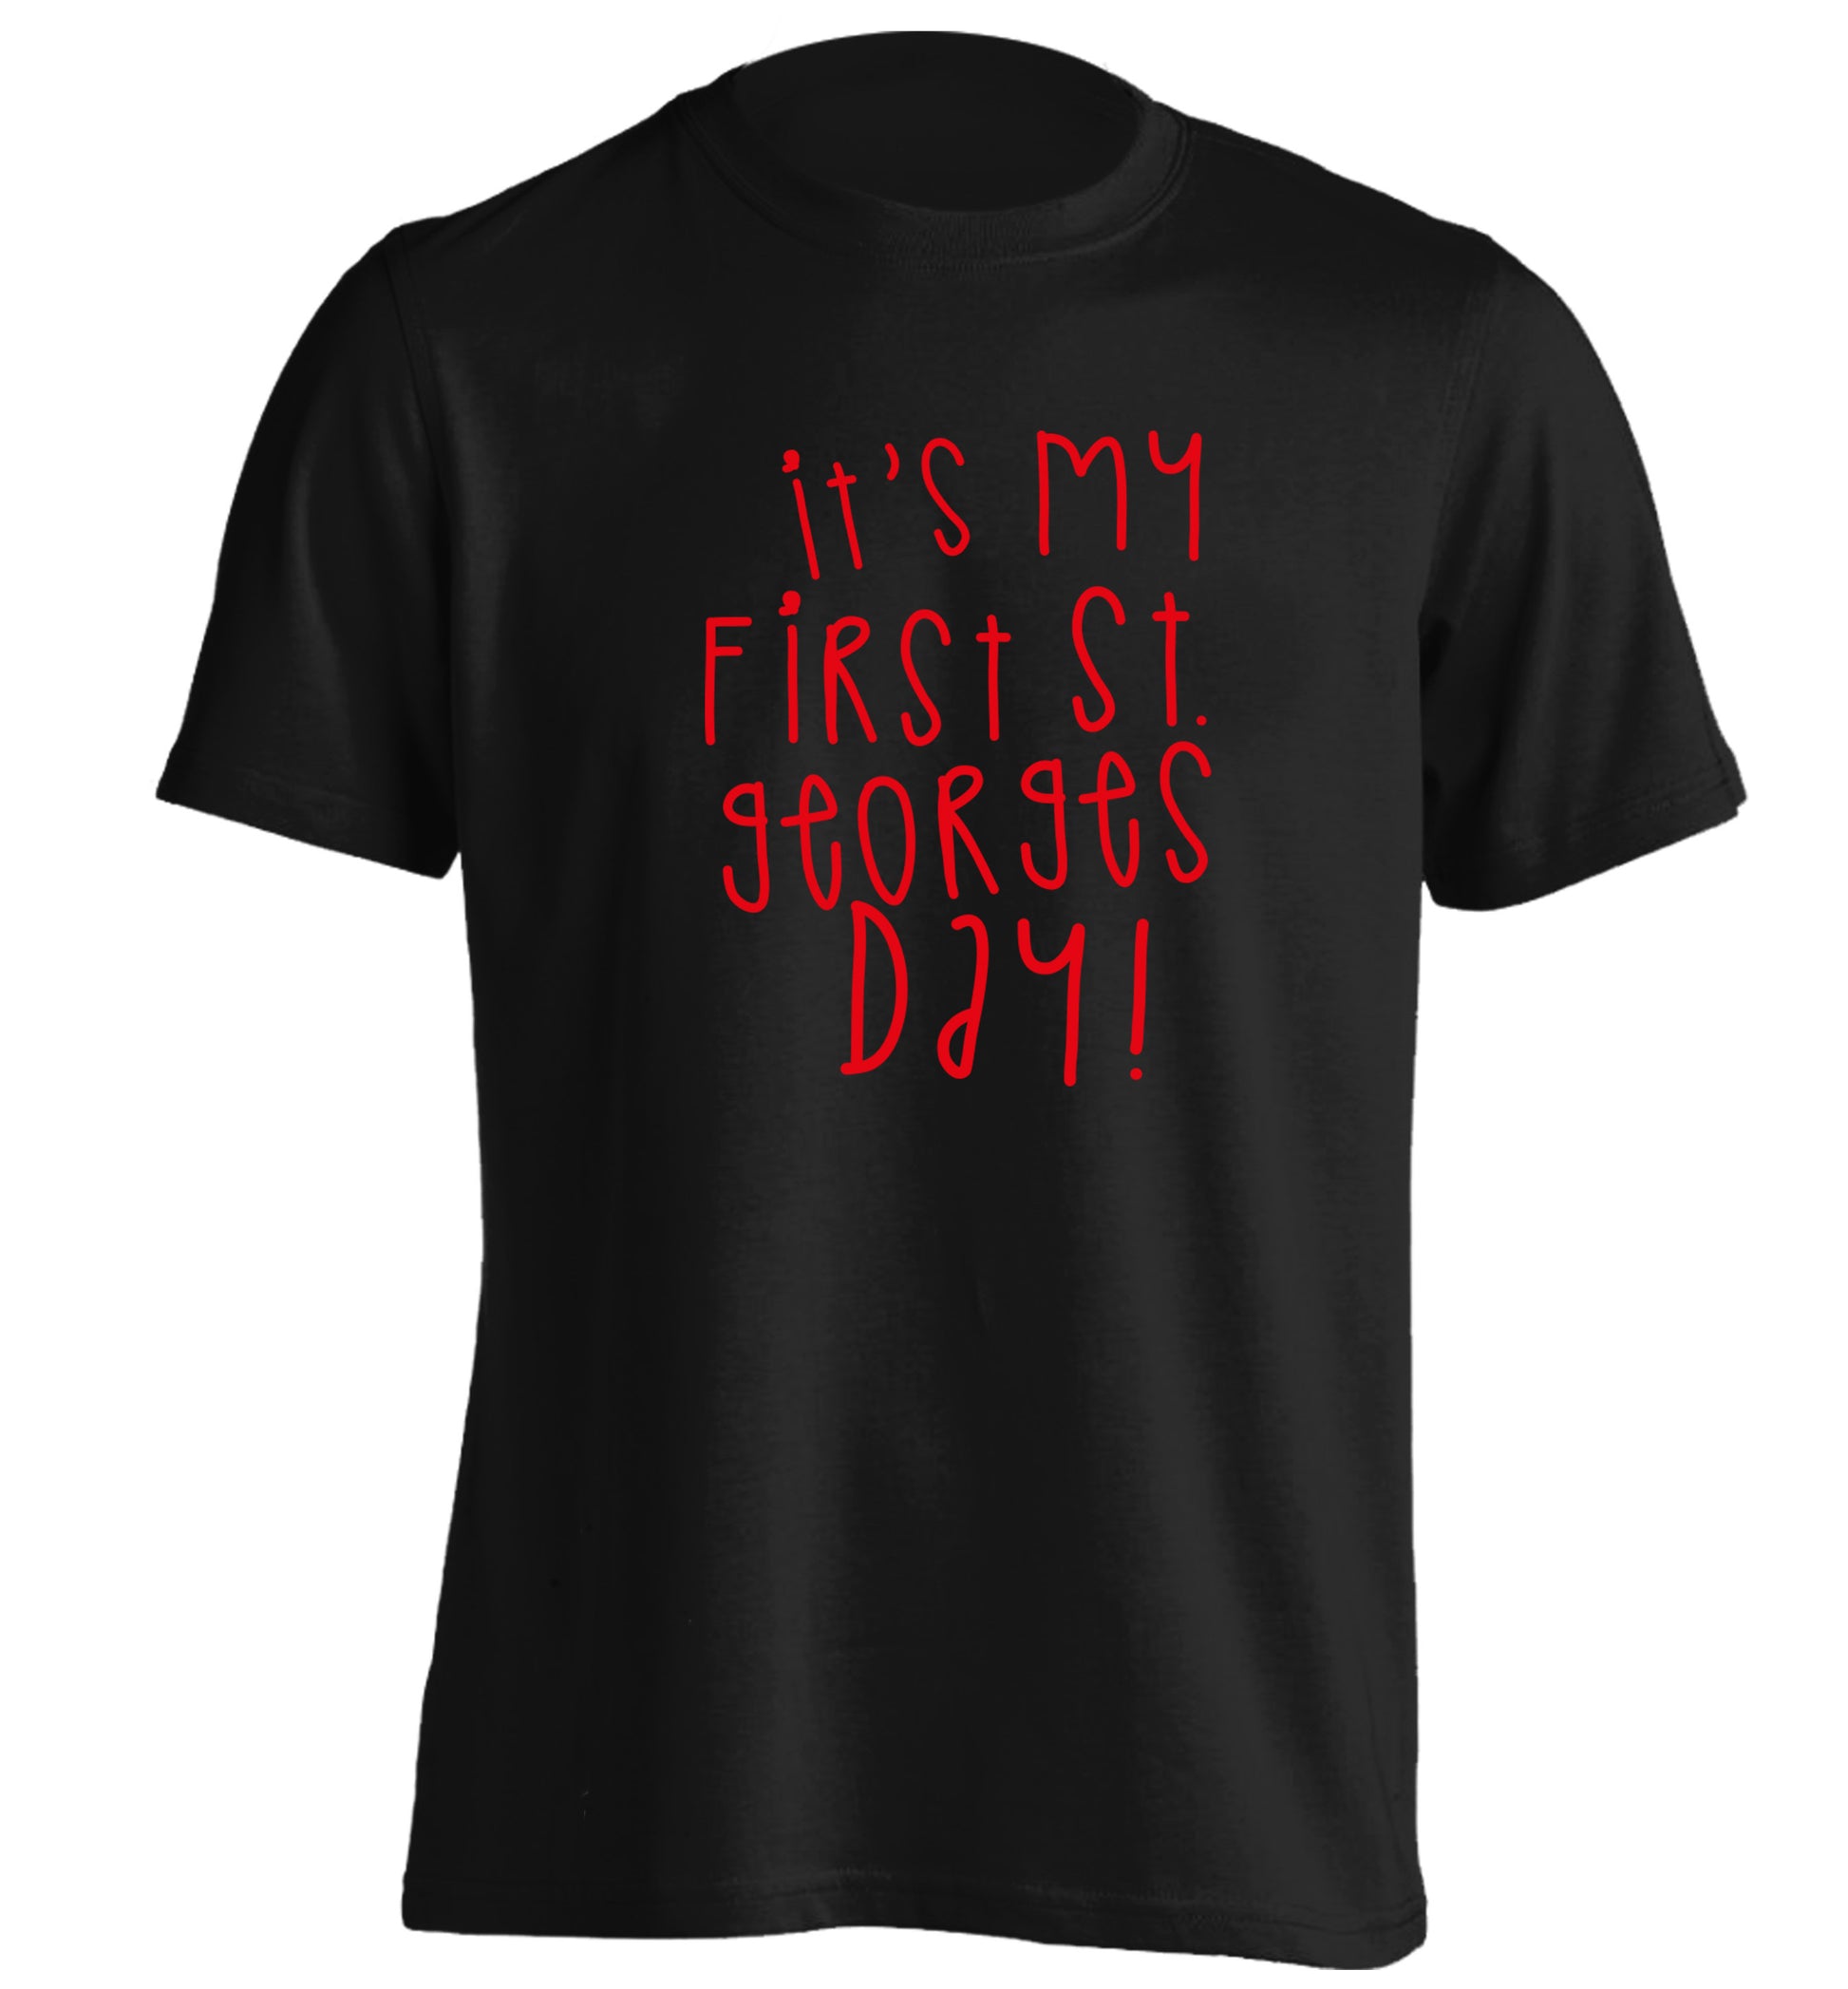 It's my first St Georges day adults unisex black Tshirt 2XL